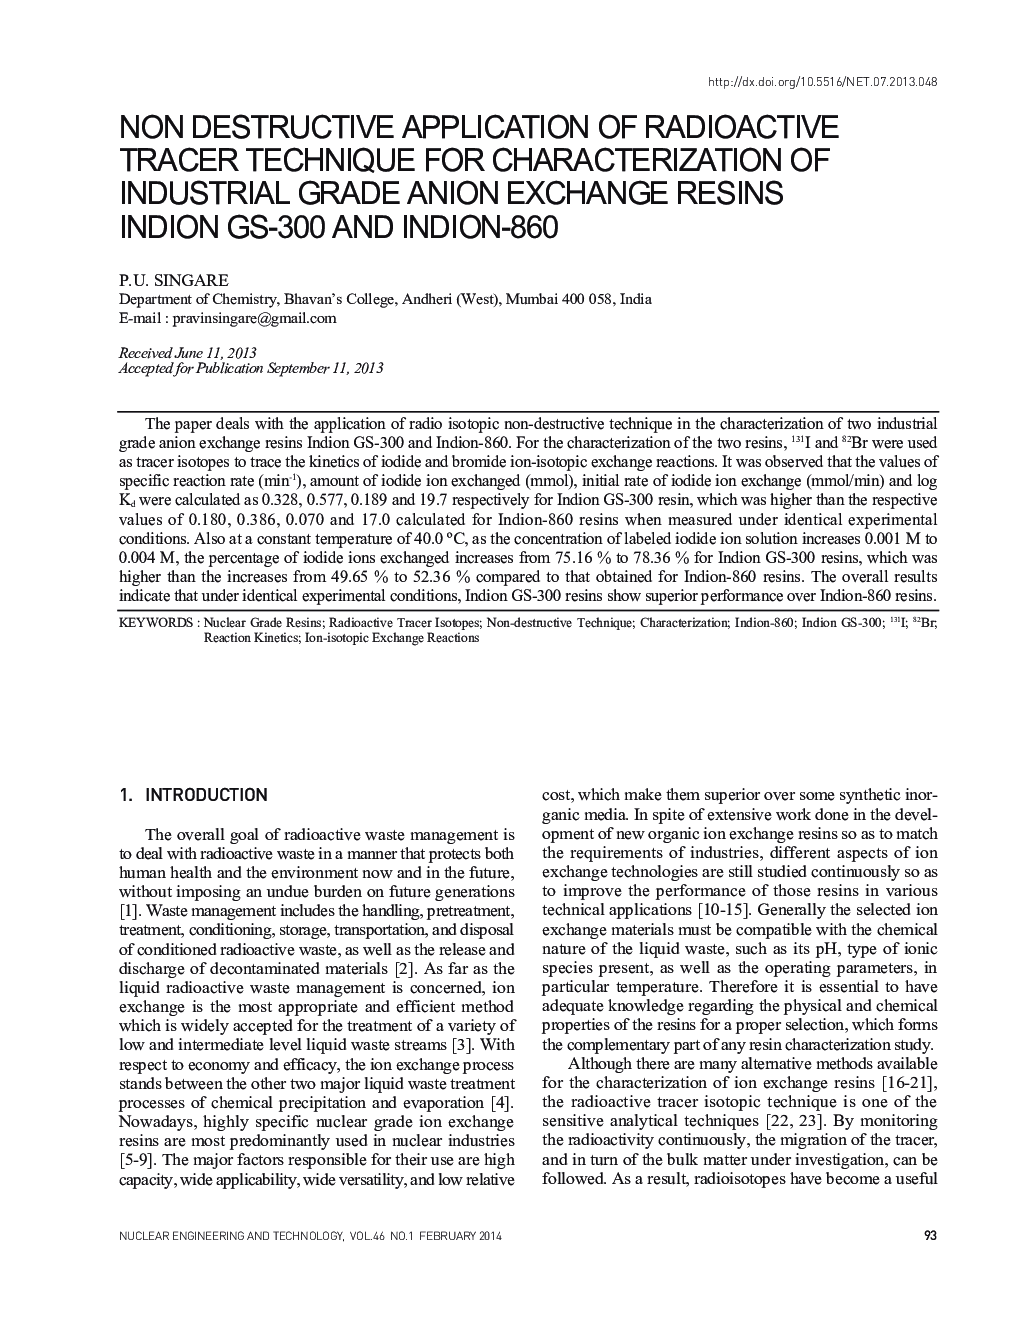 NON DESTRUCTIVE APPLICATION OF RADIOACTIVE TRACER TECHNIQUE FOR CHARACTERIZATION OF INDUSTRIAL GRADE ANION EXCHANGE RESINS INDION GS-300 AND INDION-860